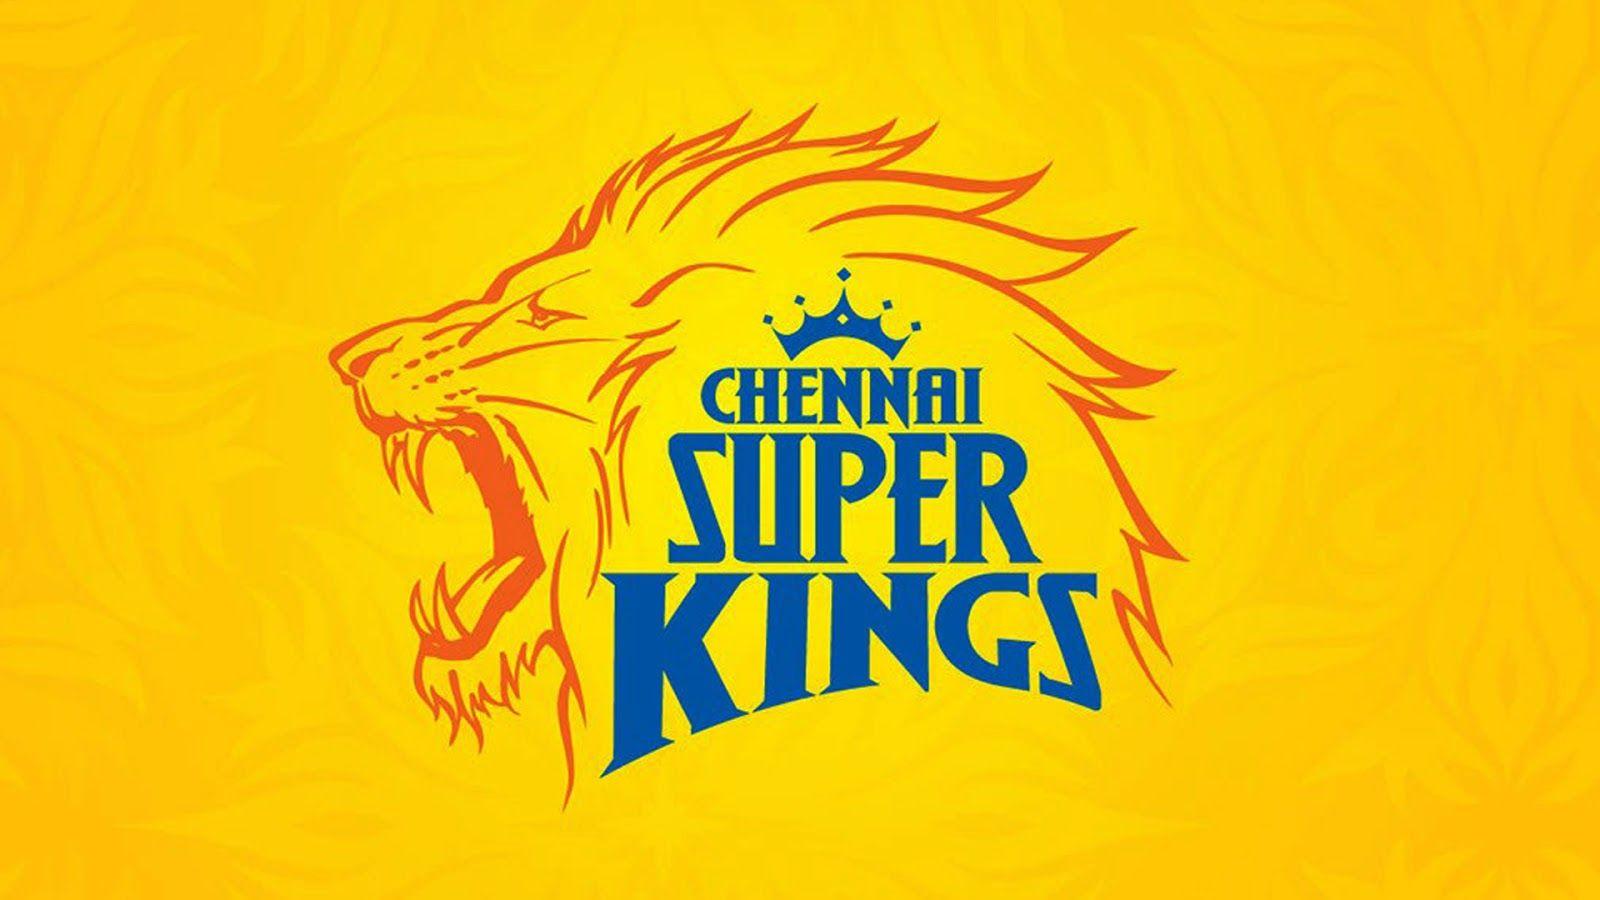 IPL 2019 Auctions: Players That Chennai Super Kings Should Buy